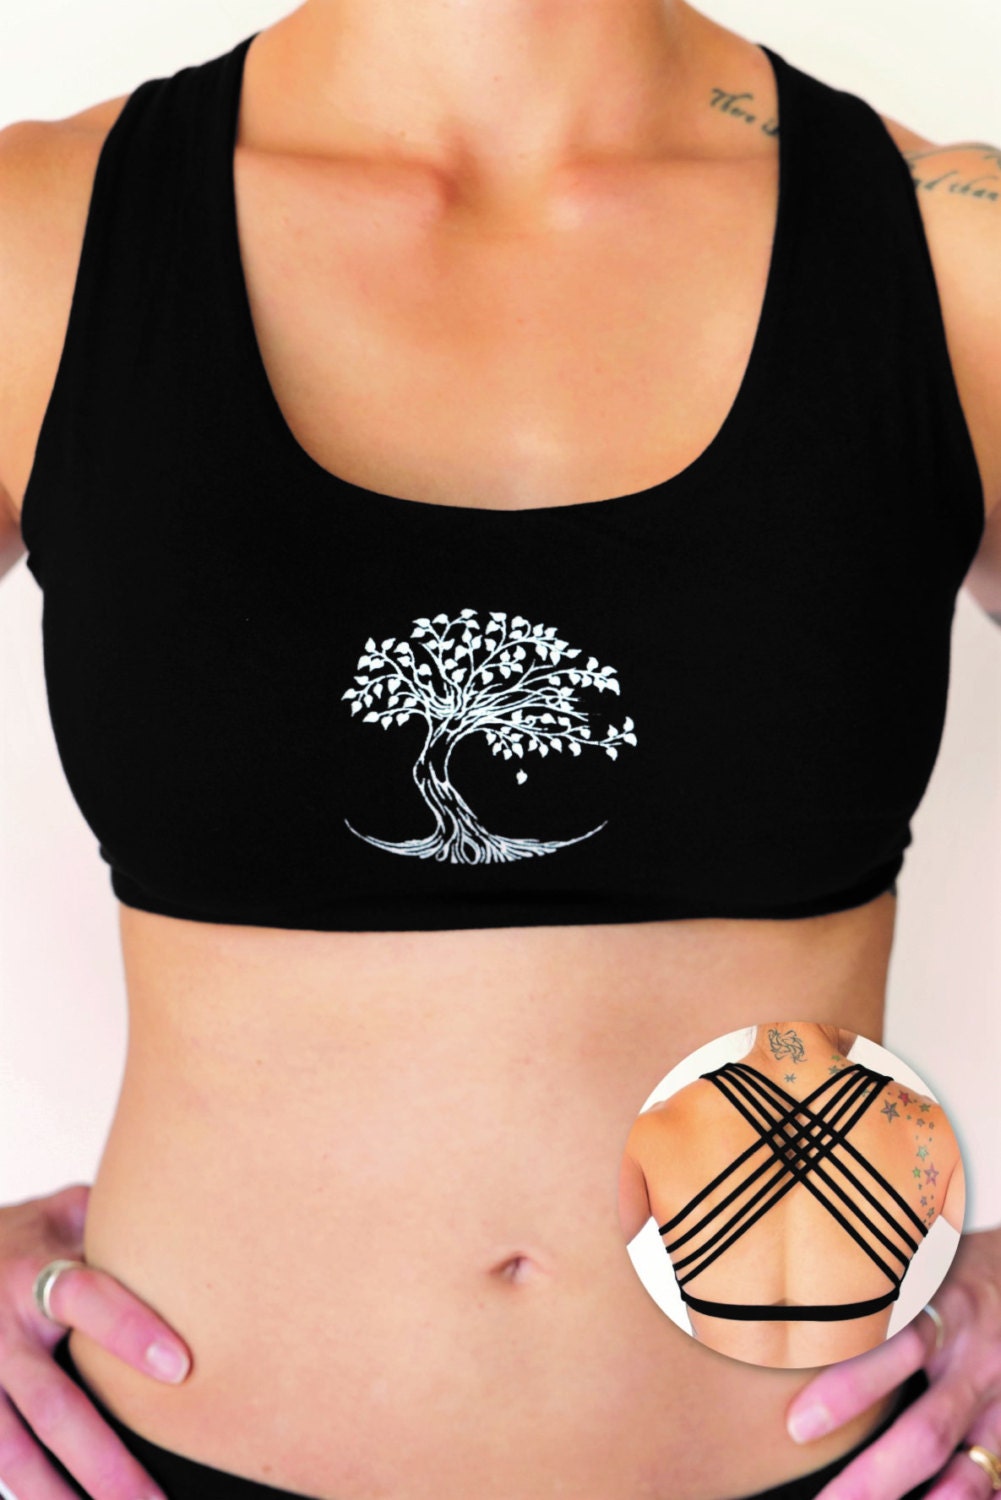 Dakini Bra in Onyx by Lotus Tribe Clothing is a Soft Fitting Style With  Light Support. A Cute, Breathable Natural Fiber Bra or Festival Top 